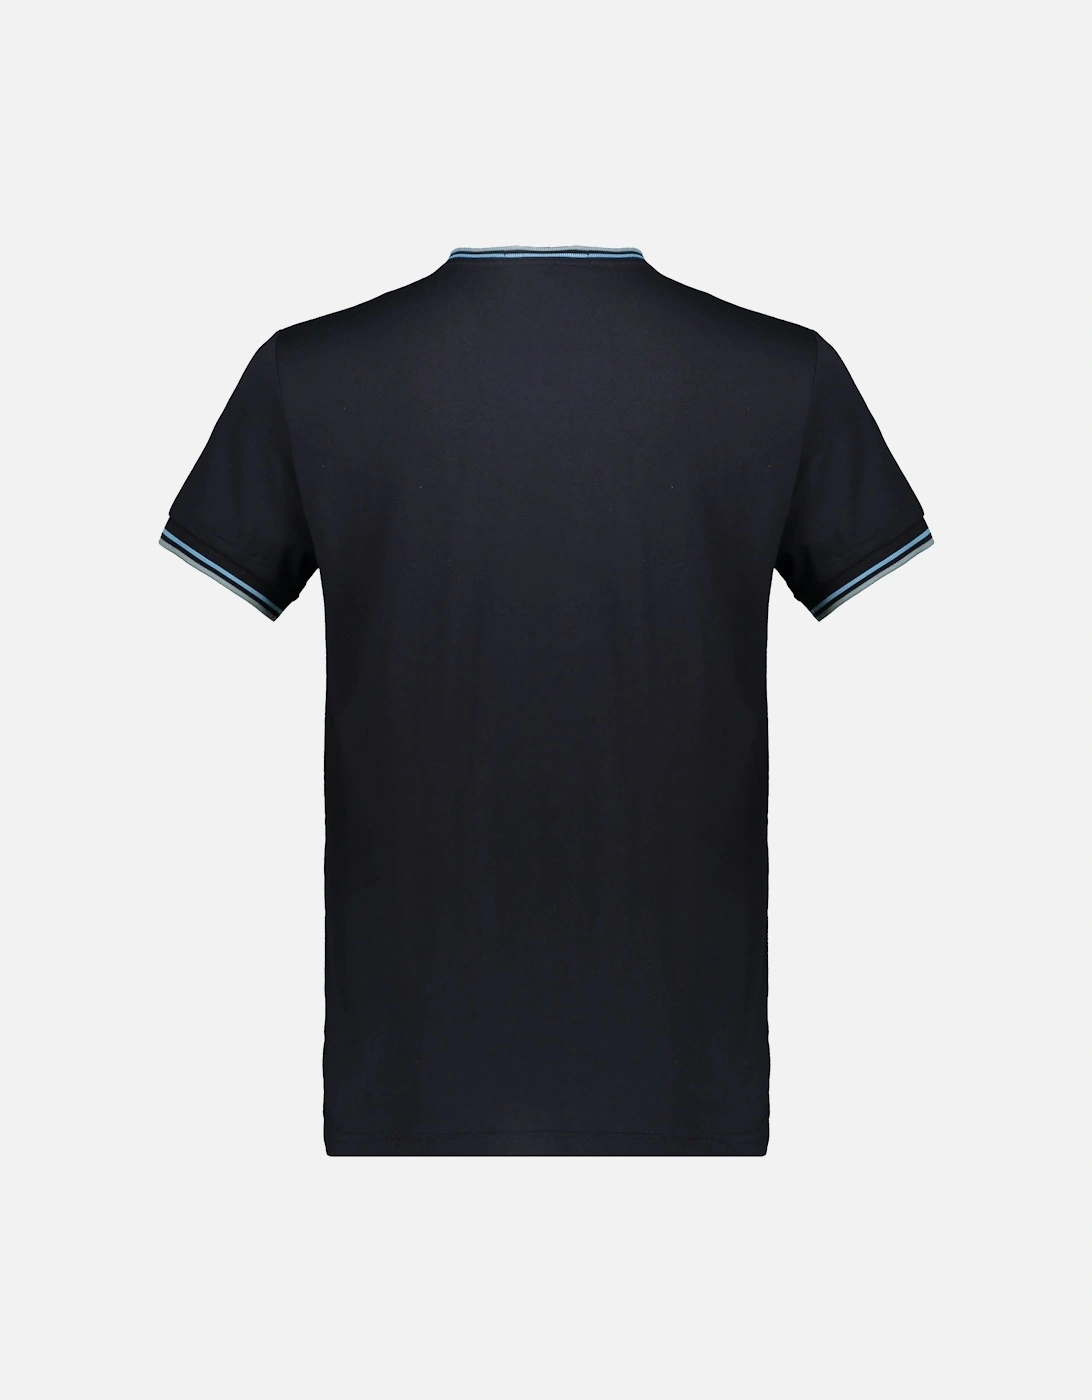 twin tipped tee - Navy